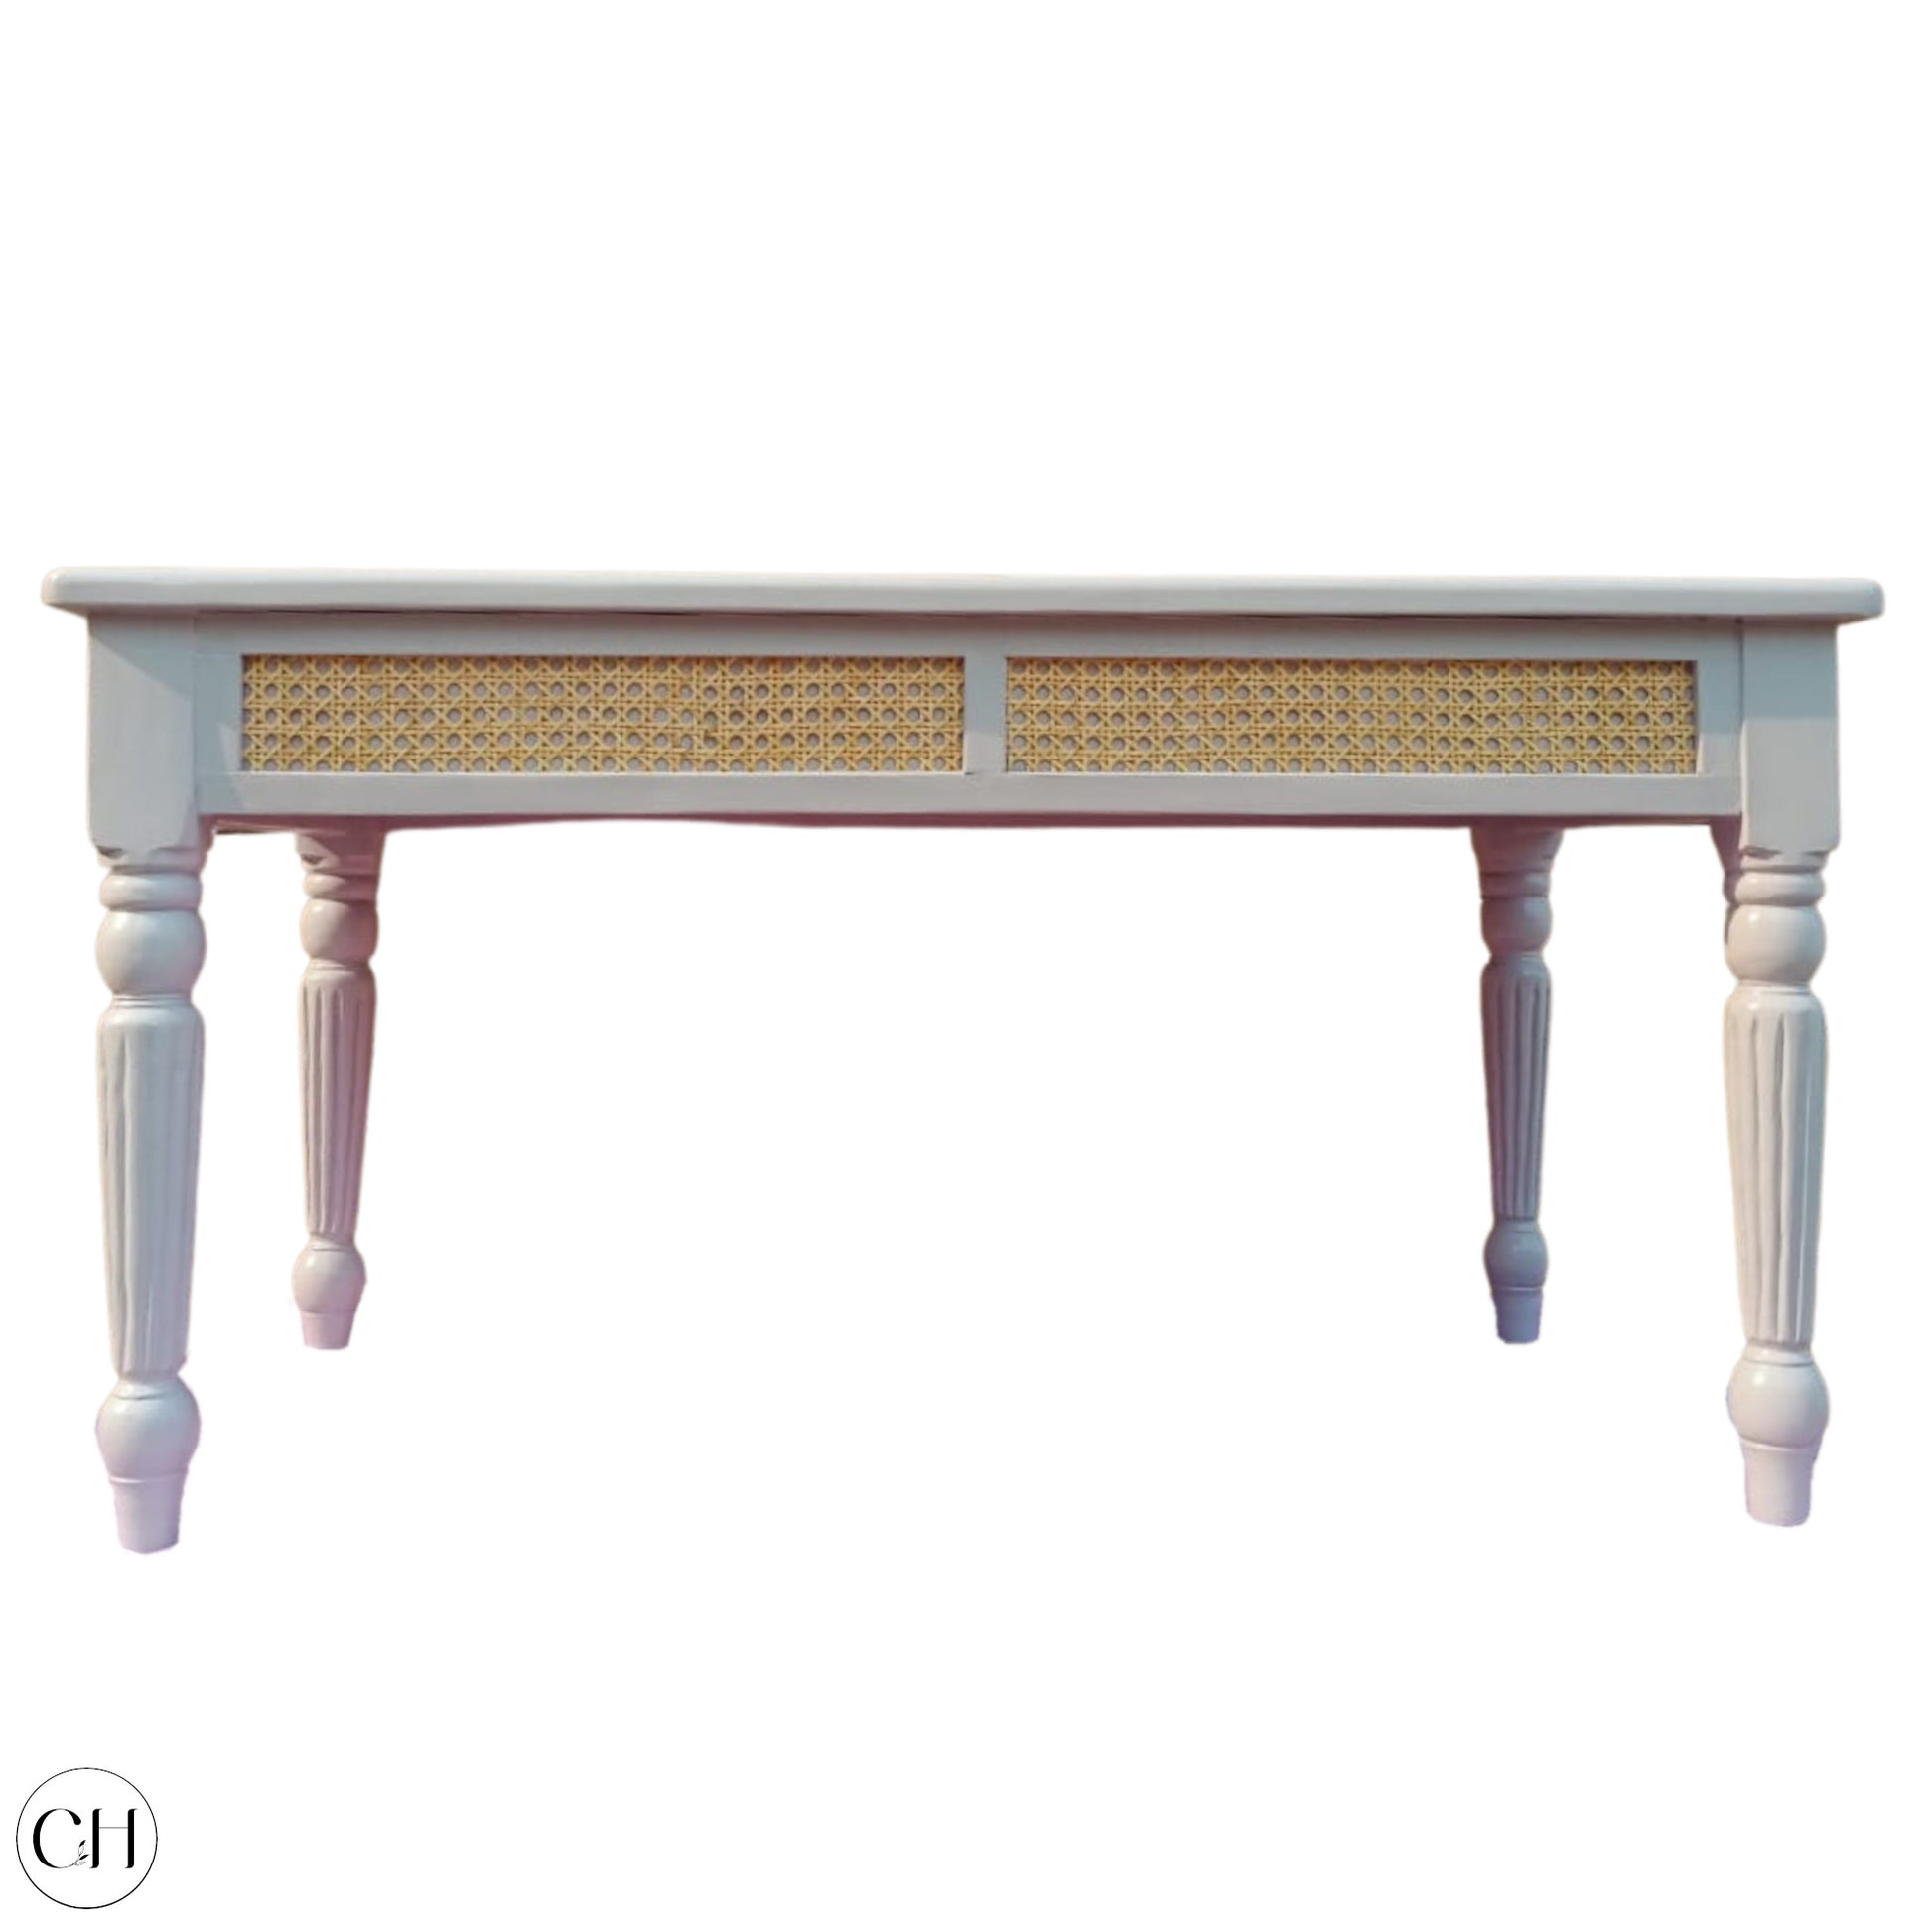 CustHum - Coffee table with glossy laminated top, rattan accent on apron, turned legs (front view, white background)